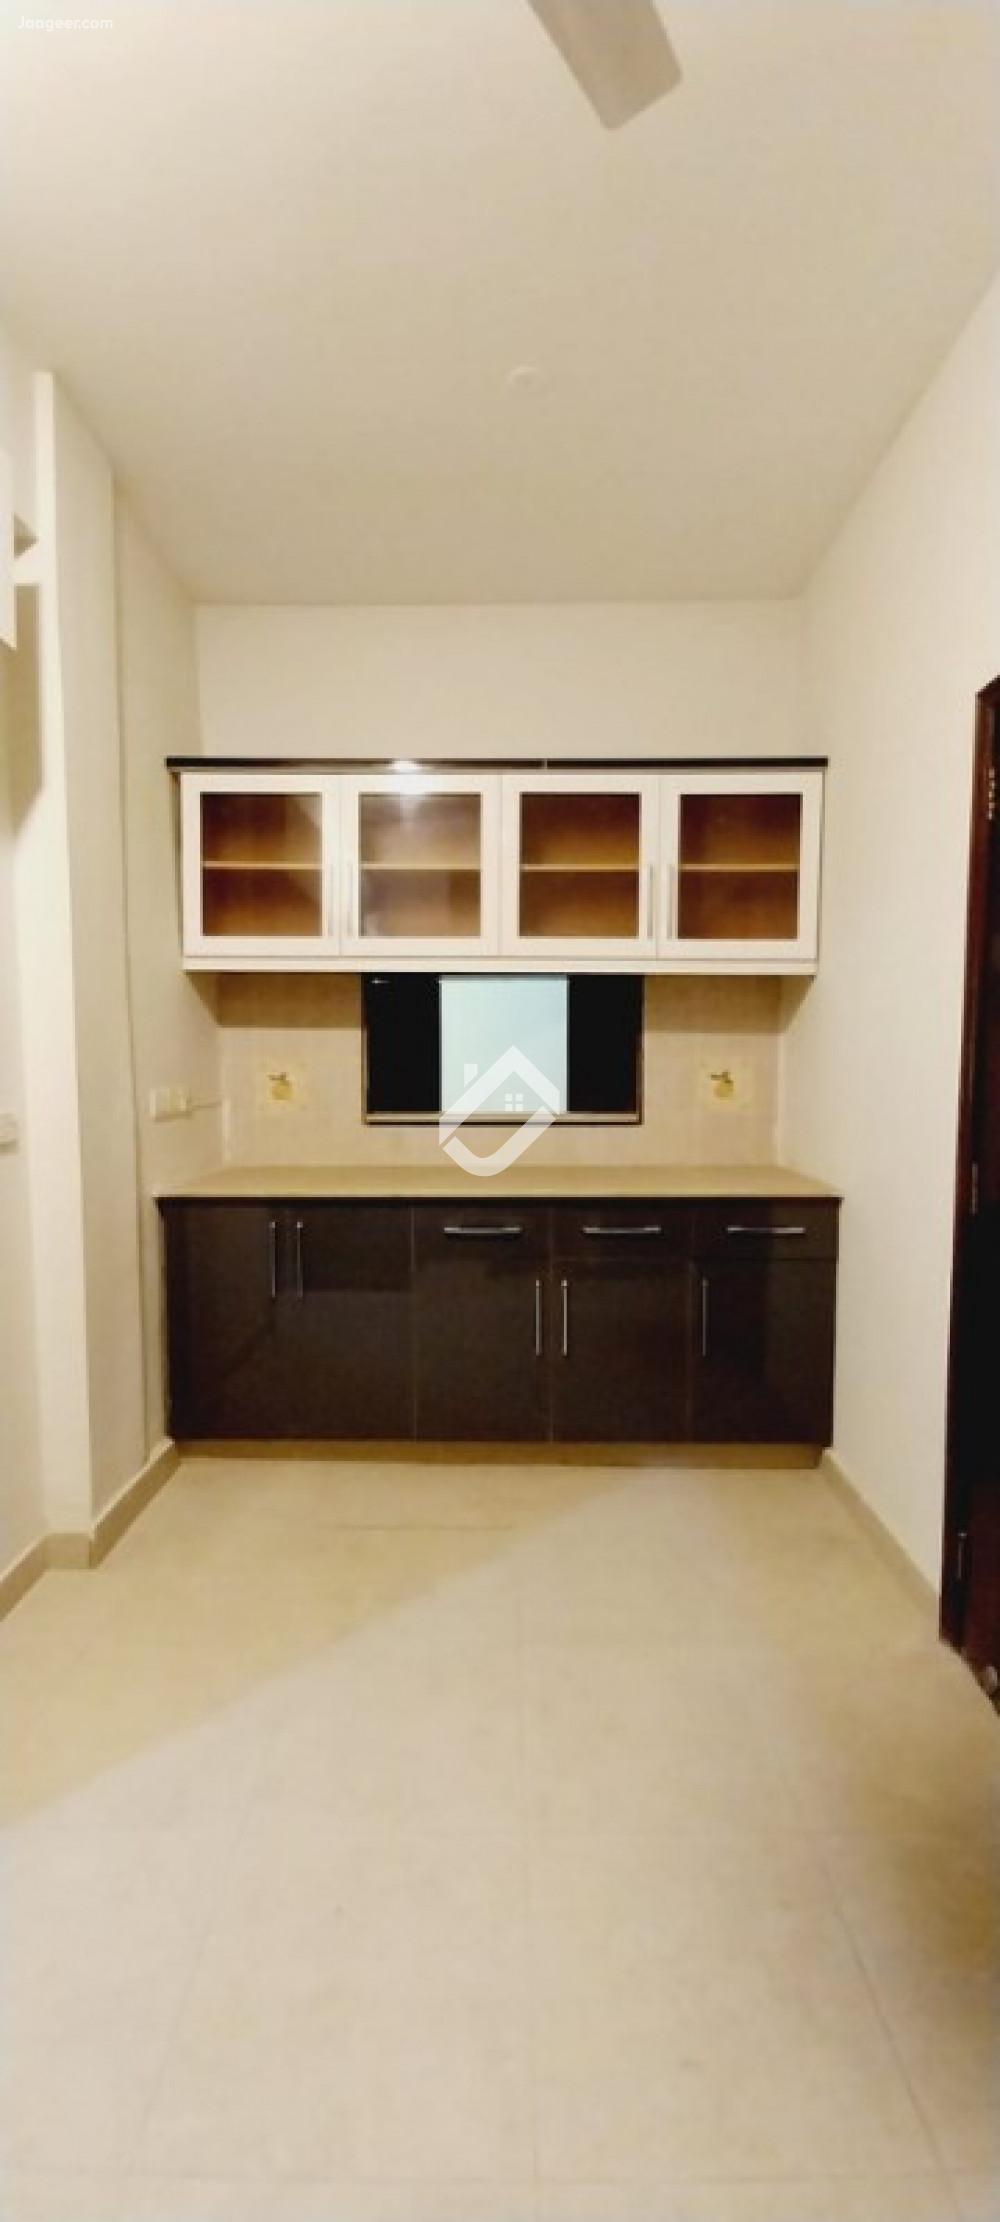 View  3 Bed Apartment For Rent In F11  in F-11, Islamabad